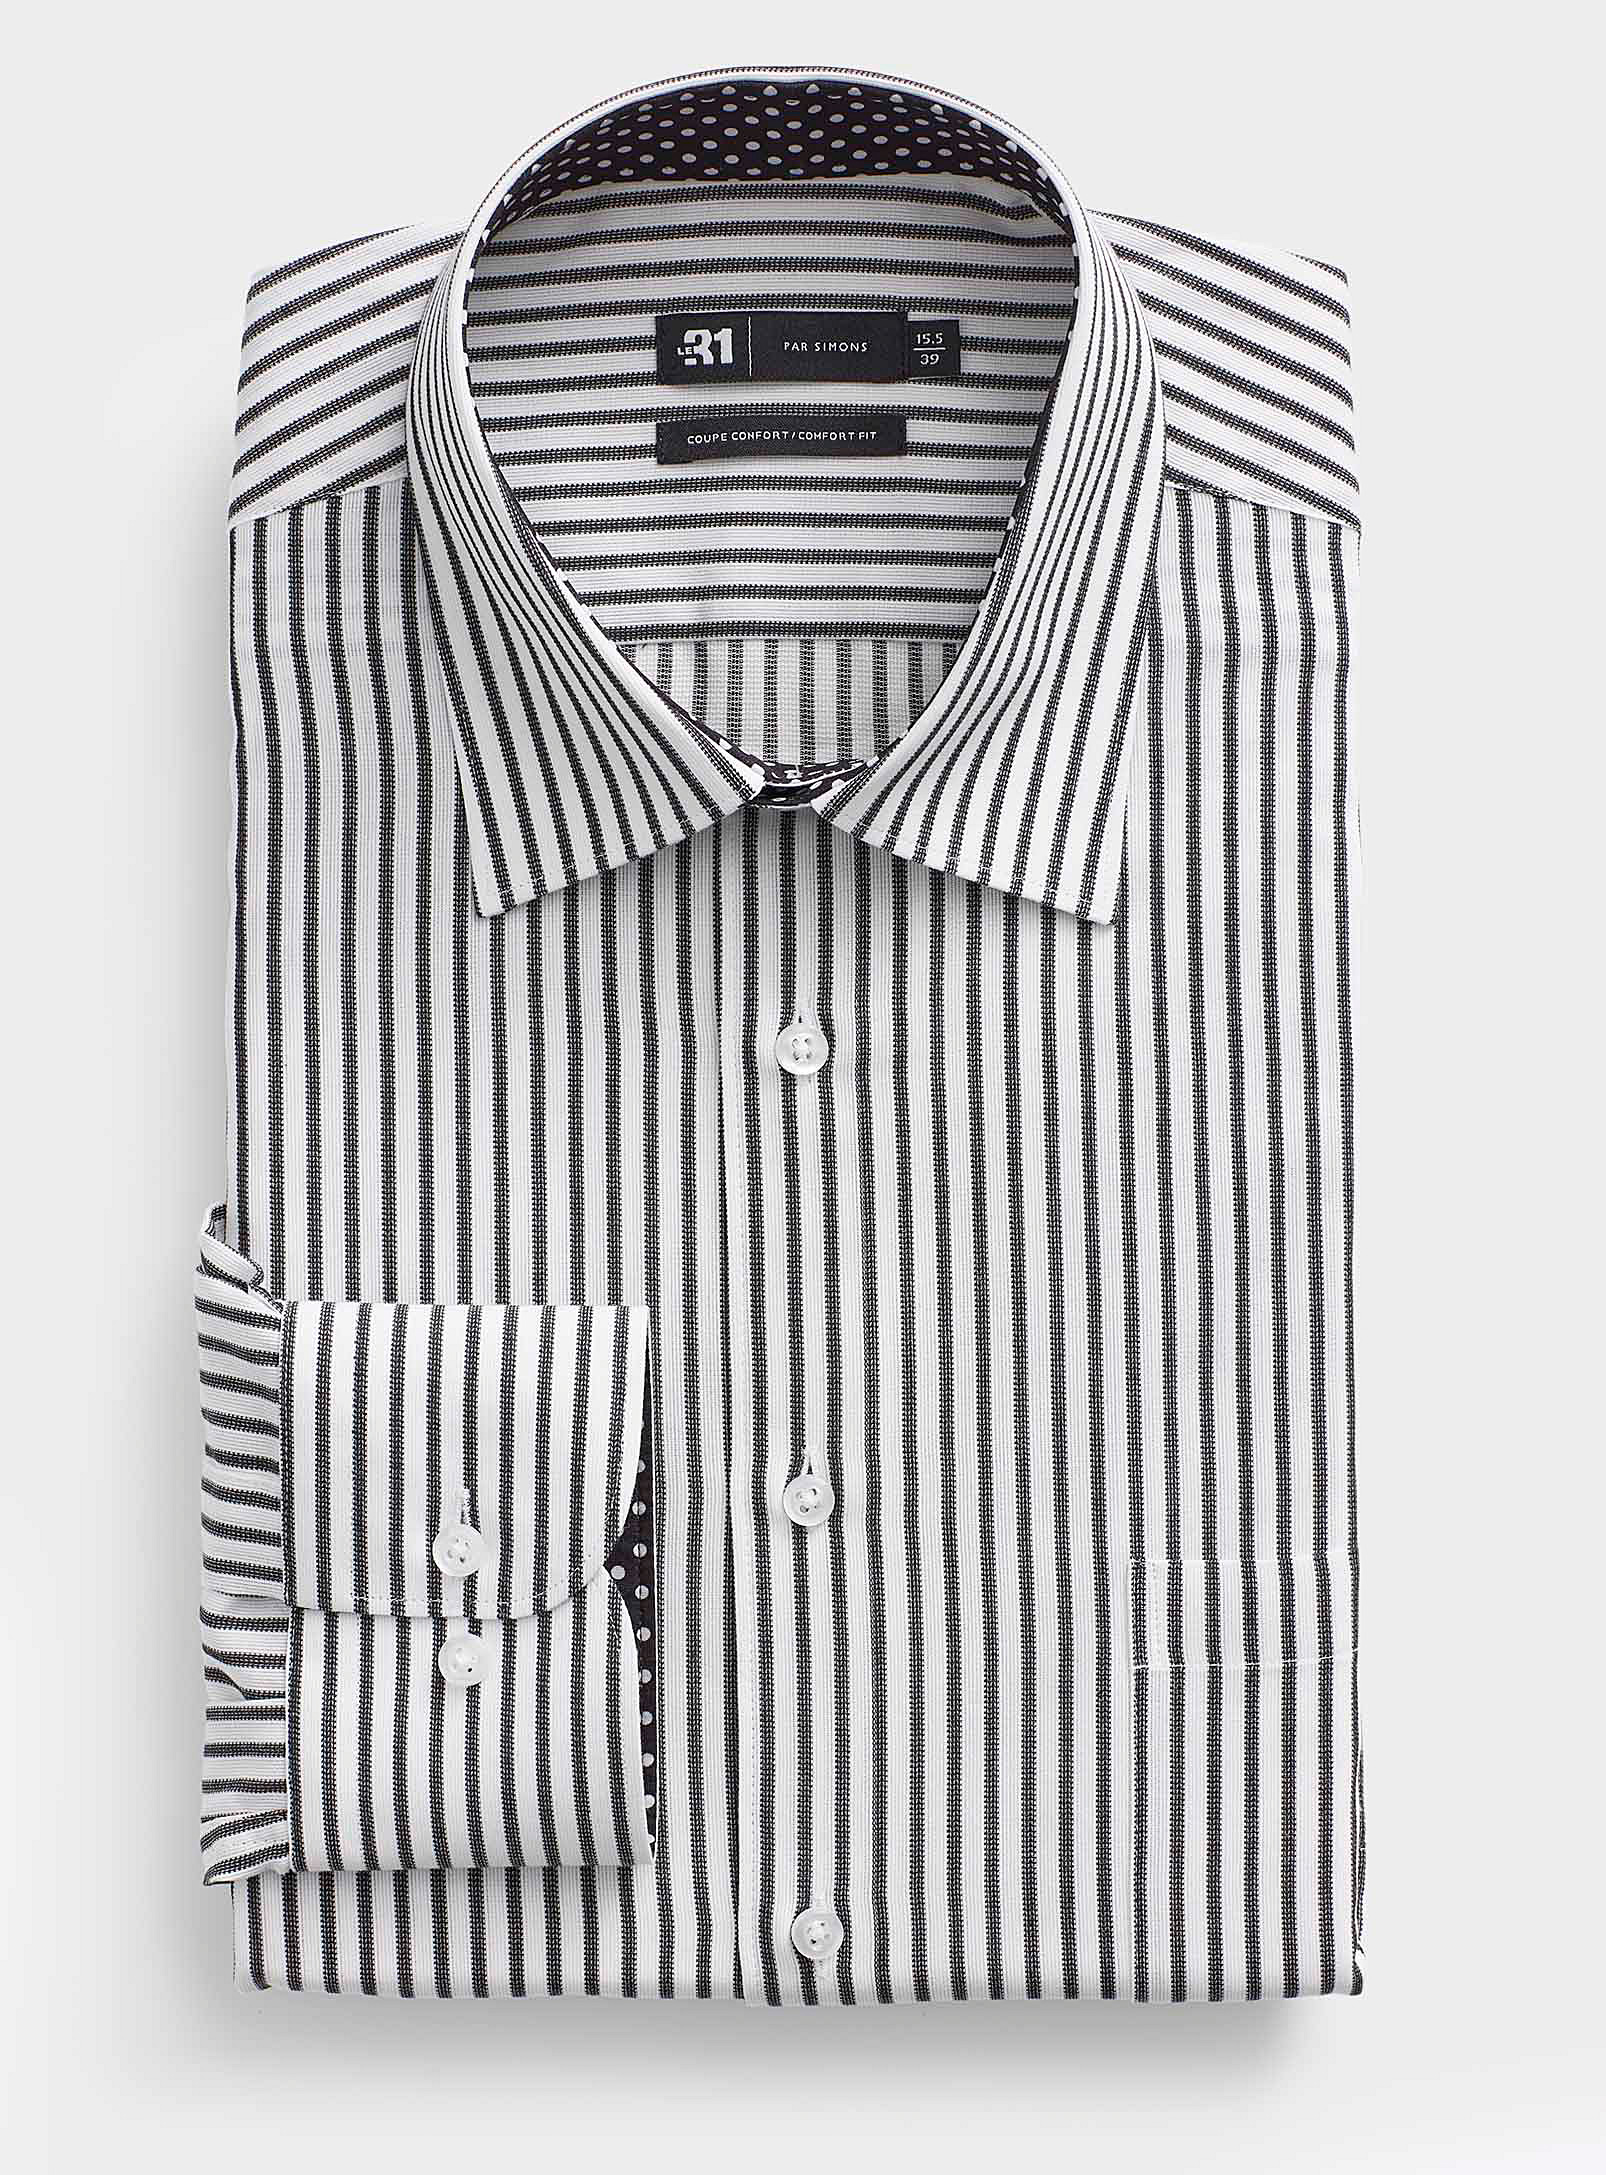 Le 31 Twin-stripe Shirt Comfort Fit In Patterned Black